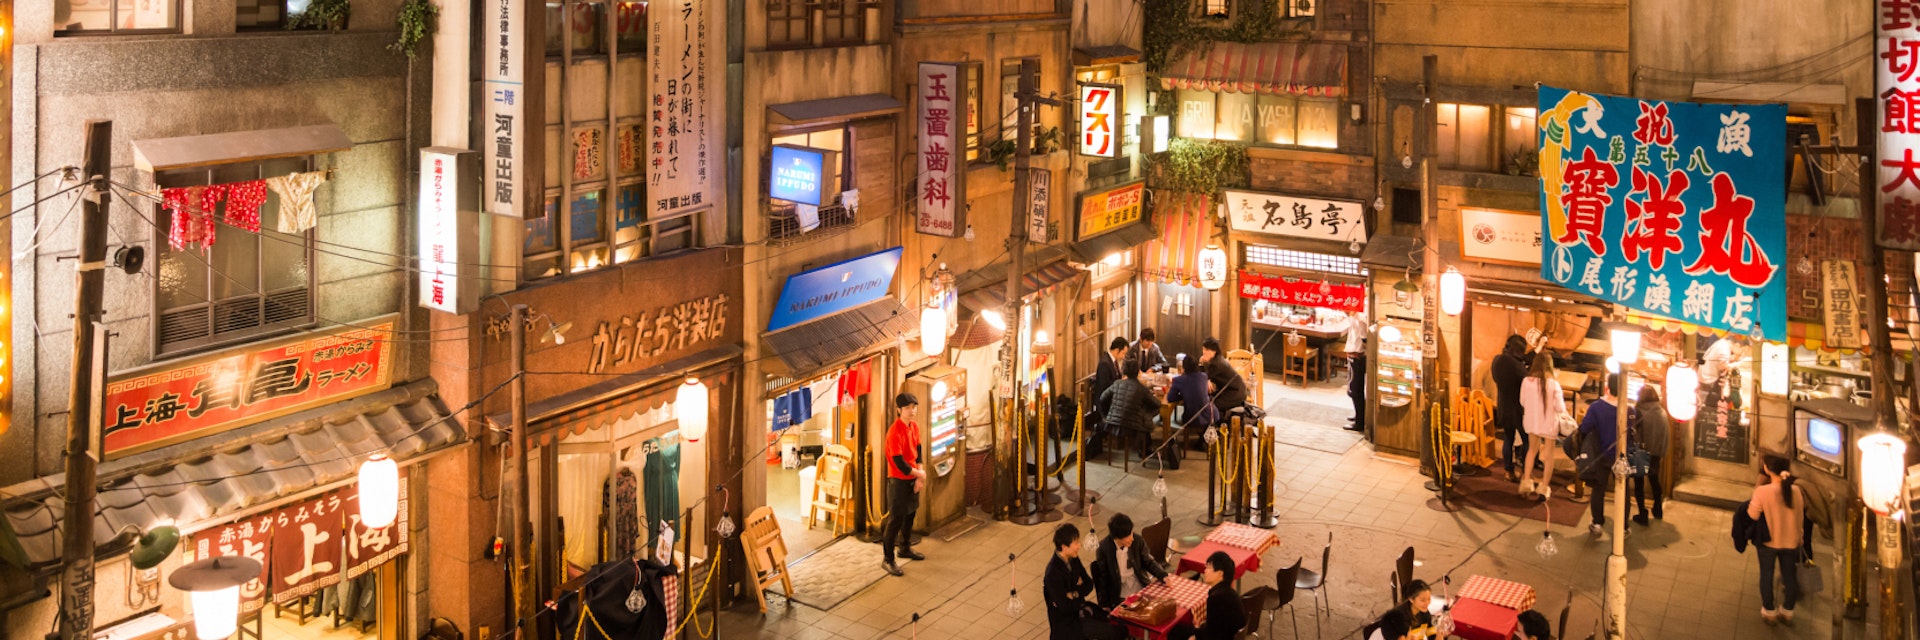 YOKOHAMA,JAPAN - March 04, 2015 : Shin-Yokohama Ramen Museum was founded on March 6th, 1994 as the world's first food-themed amusement park.; Shutterstock ID 286838537; Your name (First / Last): Laura Crawford; GL account no.: 65050; Netsuite department name: Online Editorial; Full Product or Project name including edition: BiA: Takayama, south of Tokyo POI images for online